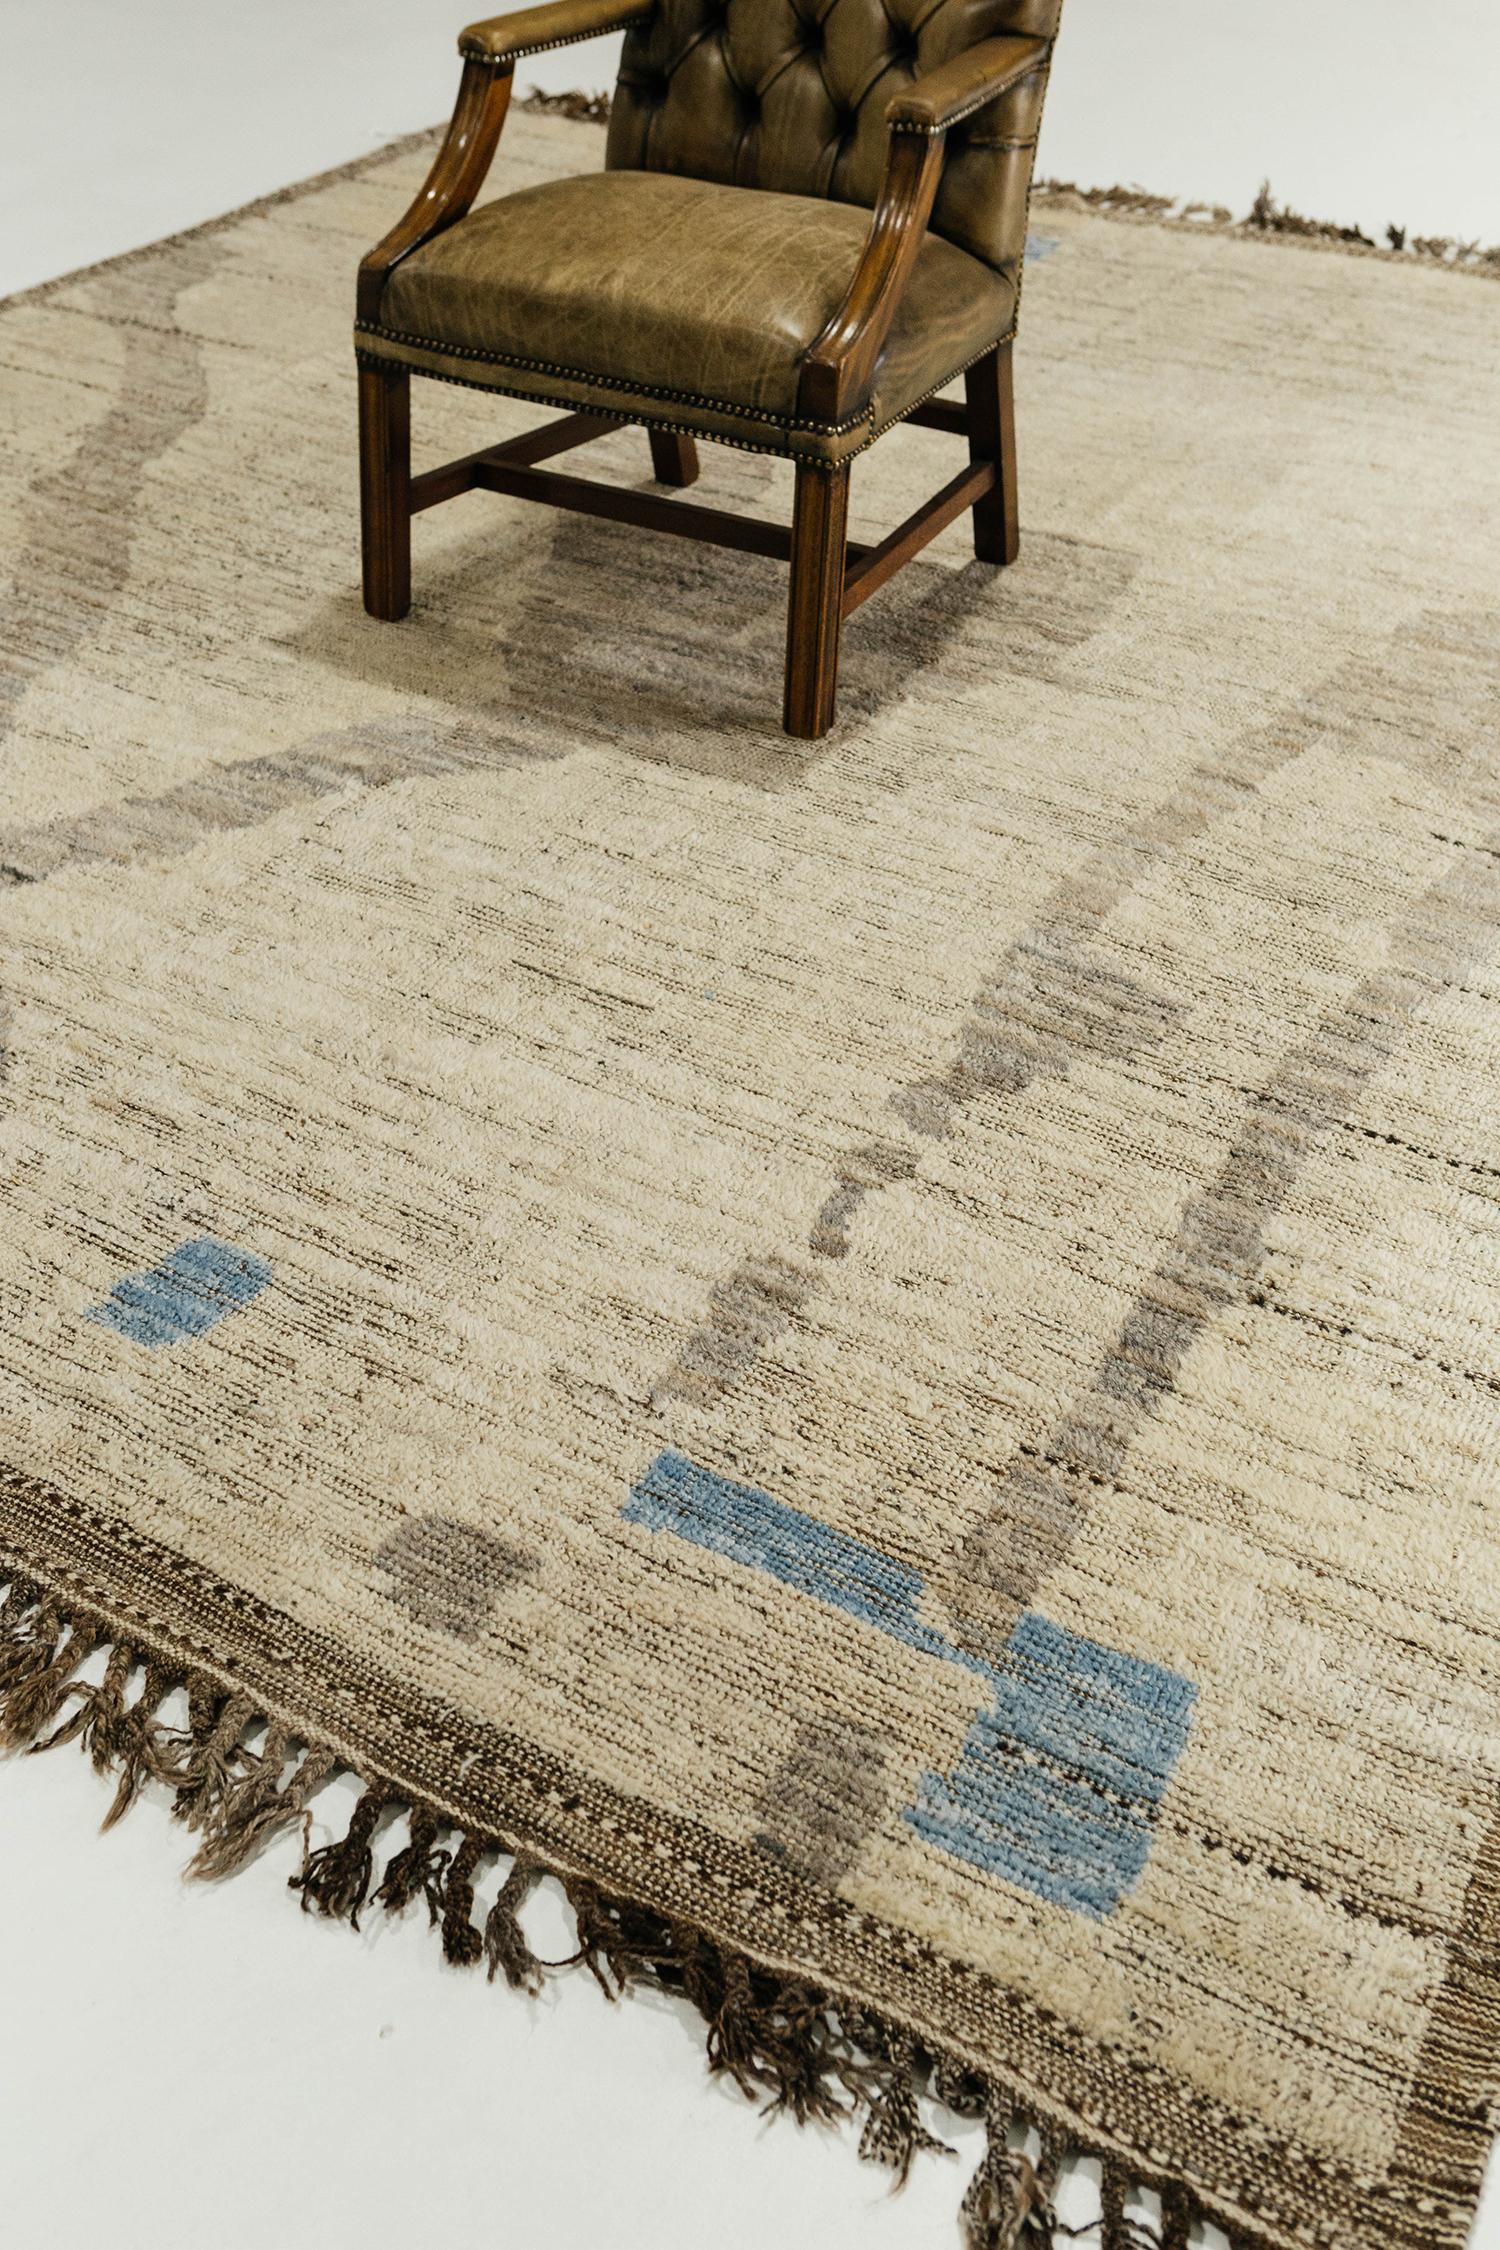 Meden' is an earth-toned natural wool rug and a modern interpretation of the Moroccan world. This rugs irregular shapes and colors resemble the fibers of nature and their ability to be used for crafts such as cords and basketry. Designed in Los